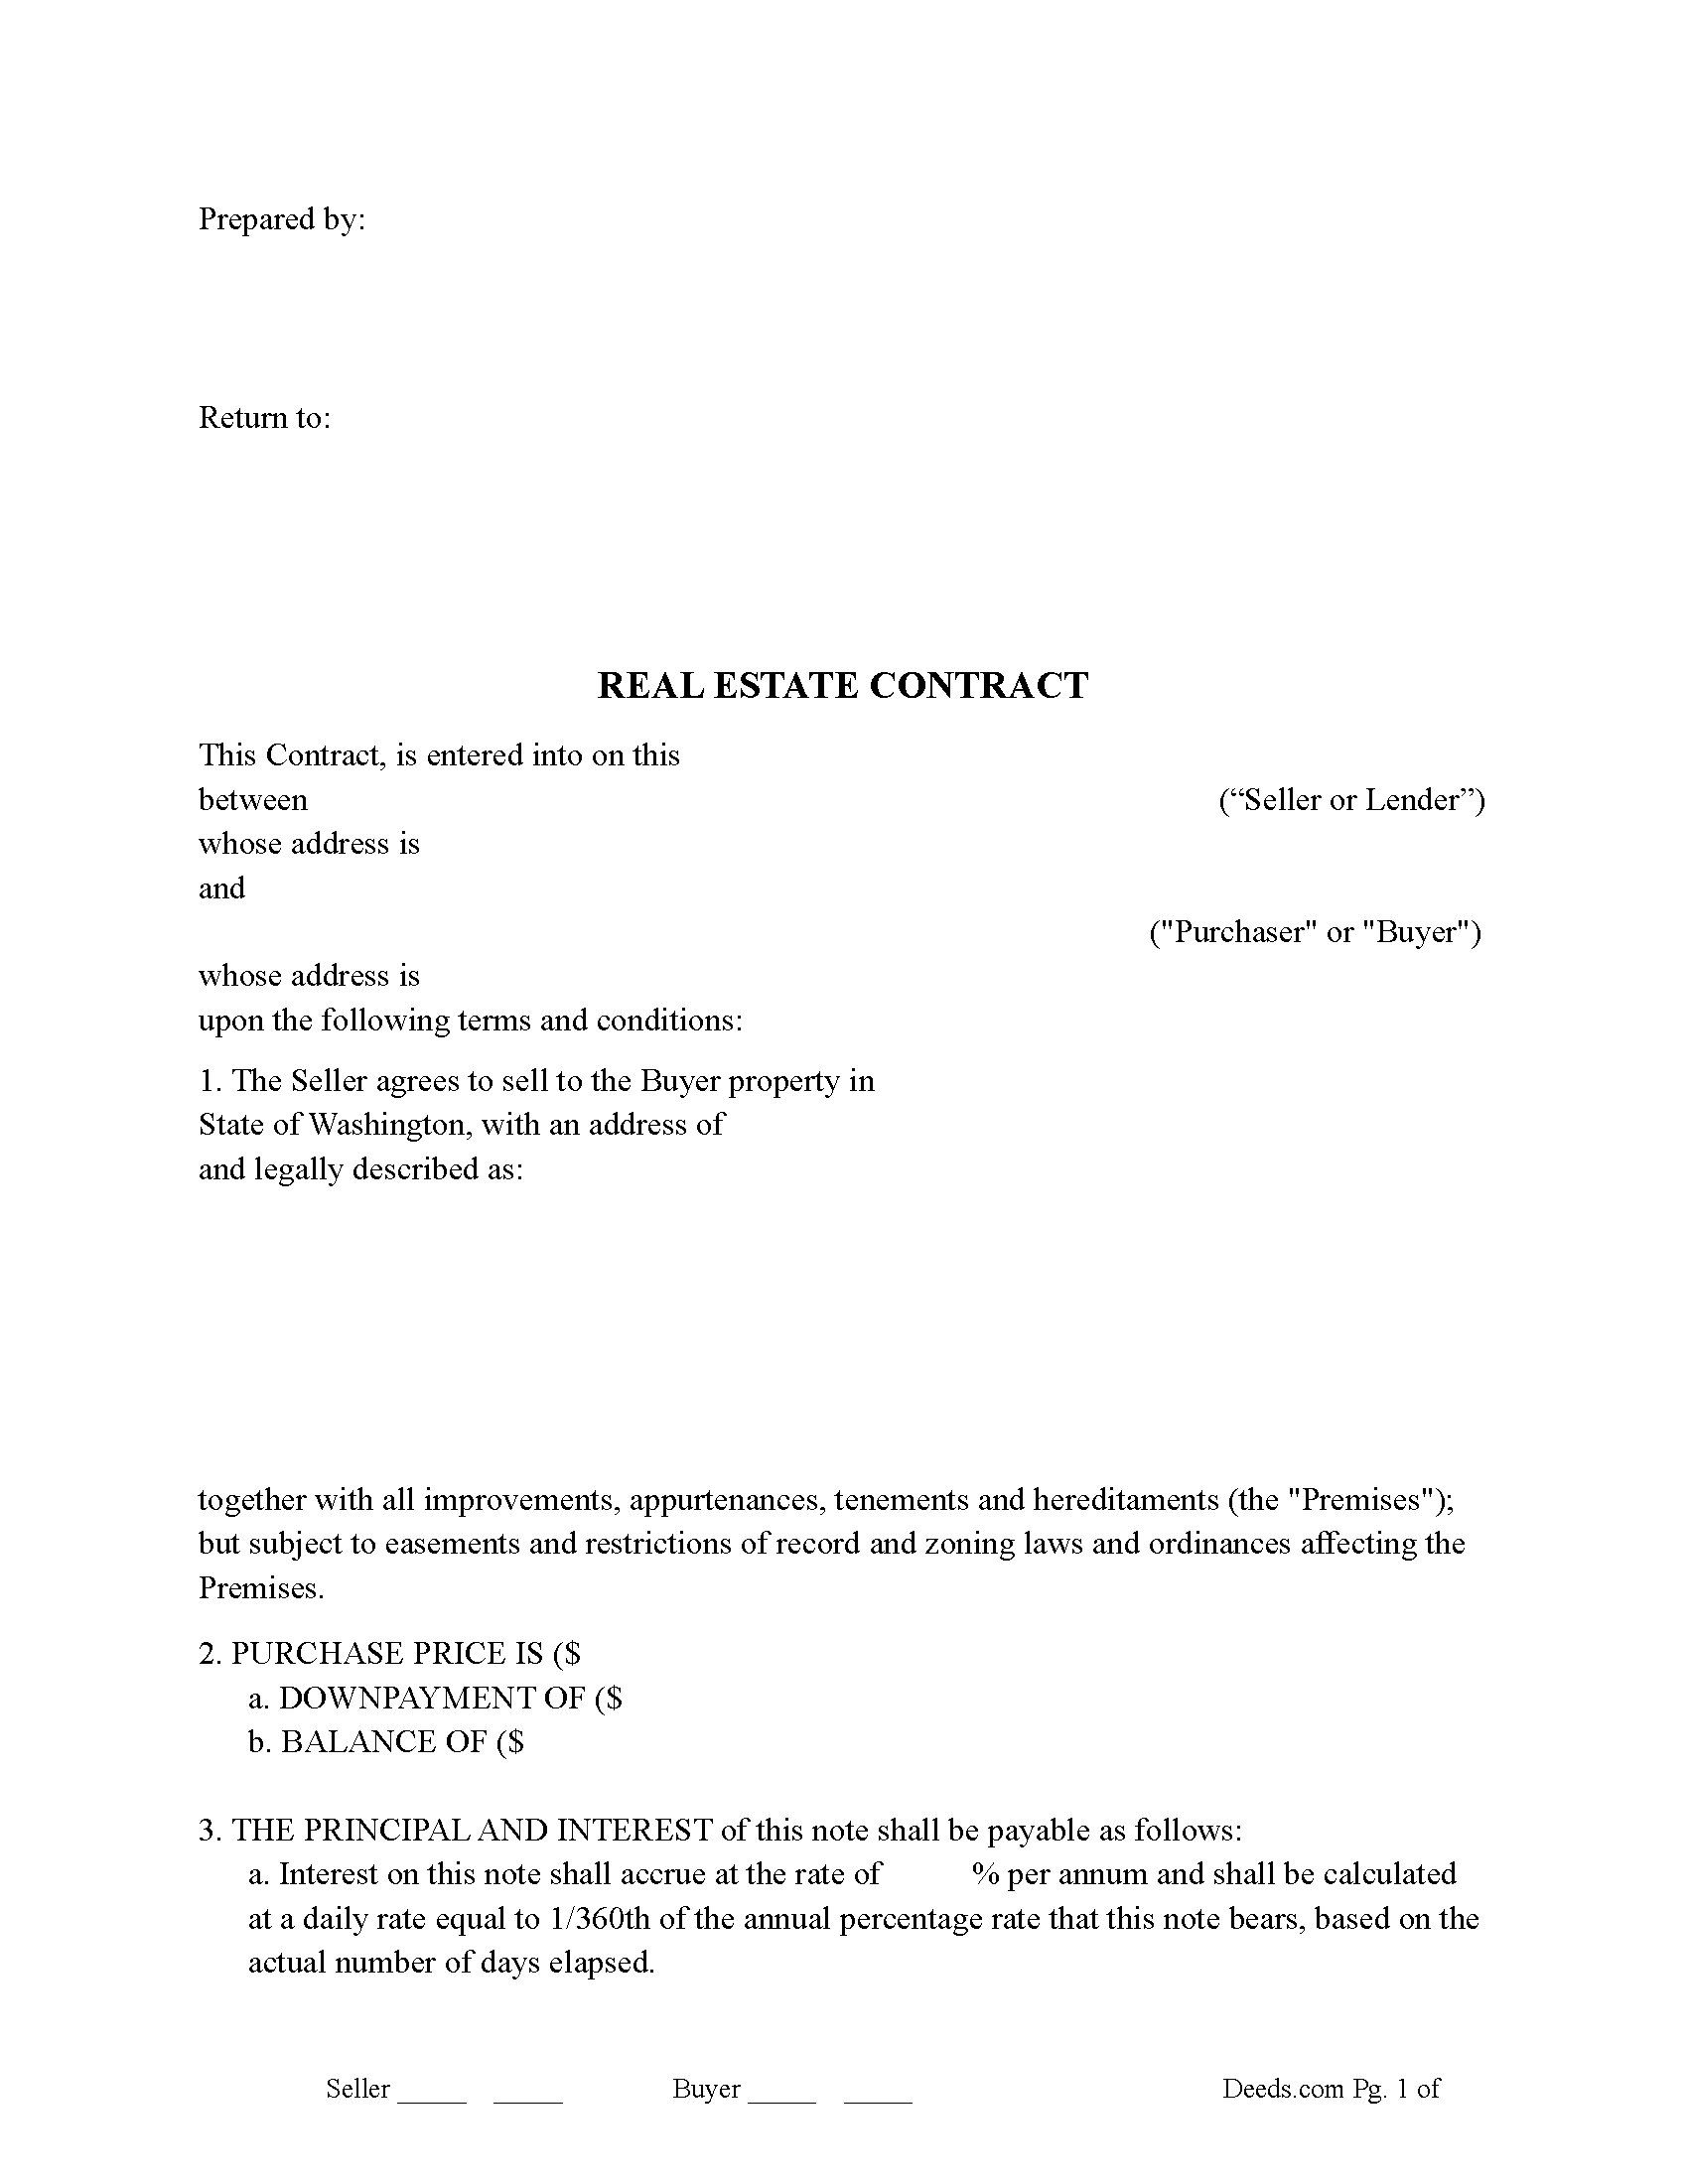 Cowlitz County Real Estate Contract Form